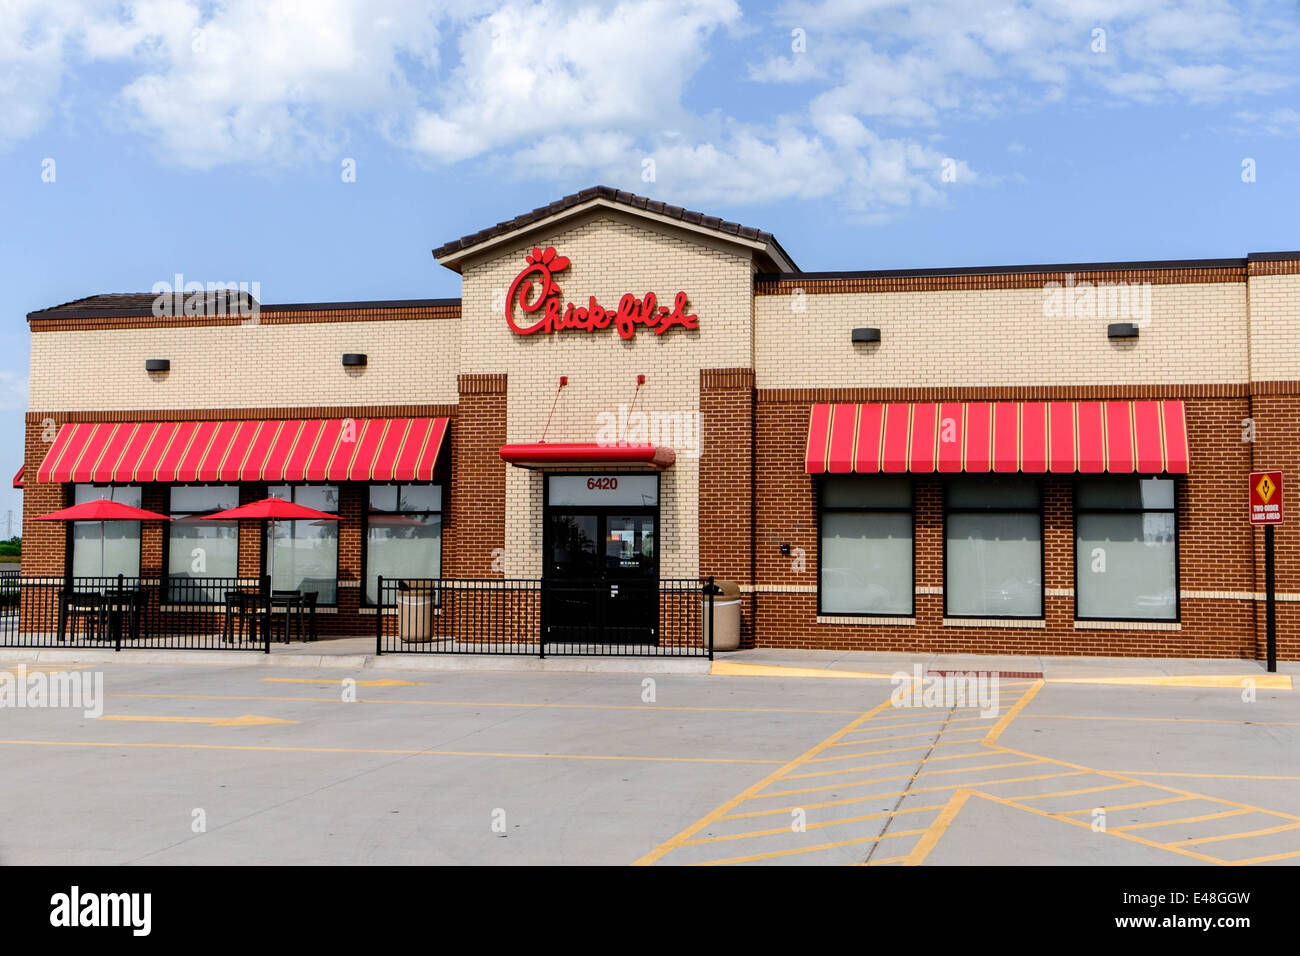 The exterior of Chick-fil-A, a popular chain fast food restaurant. Stock Photo